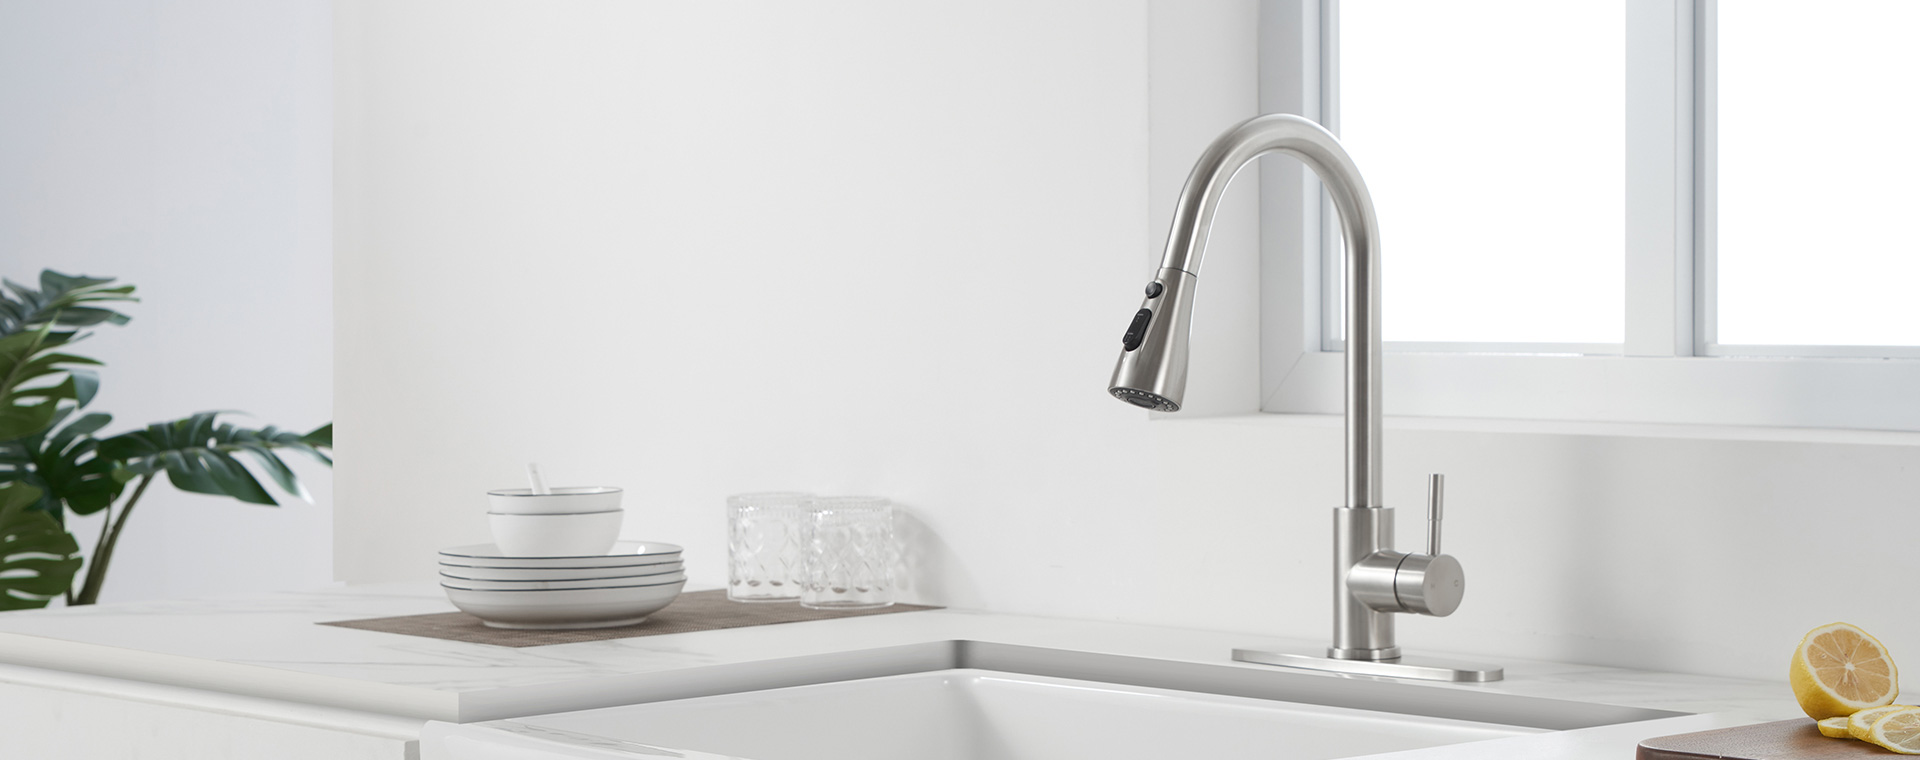 Excellent Single Hole Bathroom Faucet with Sink